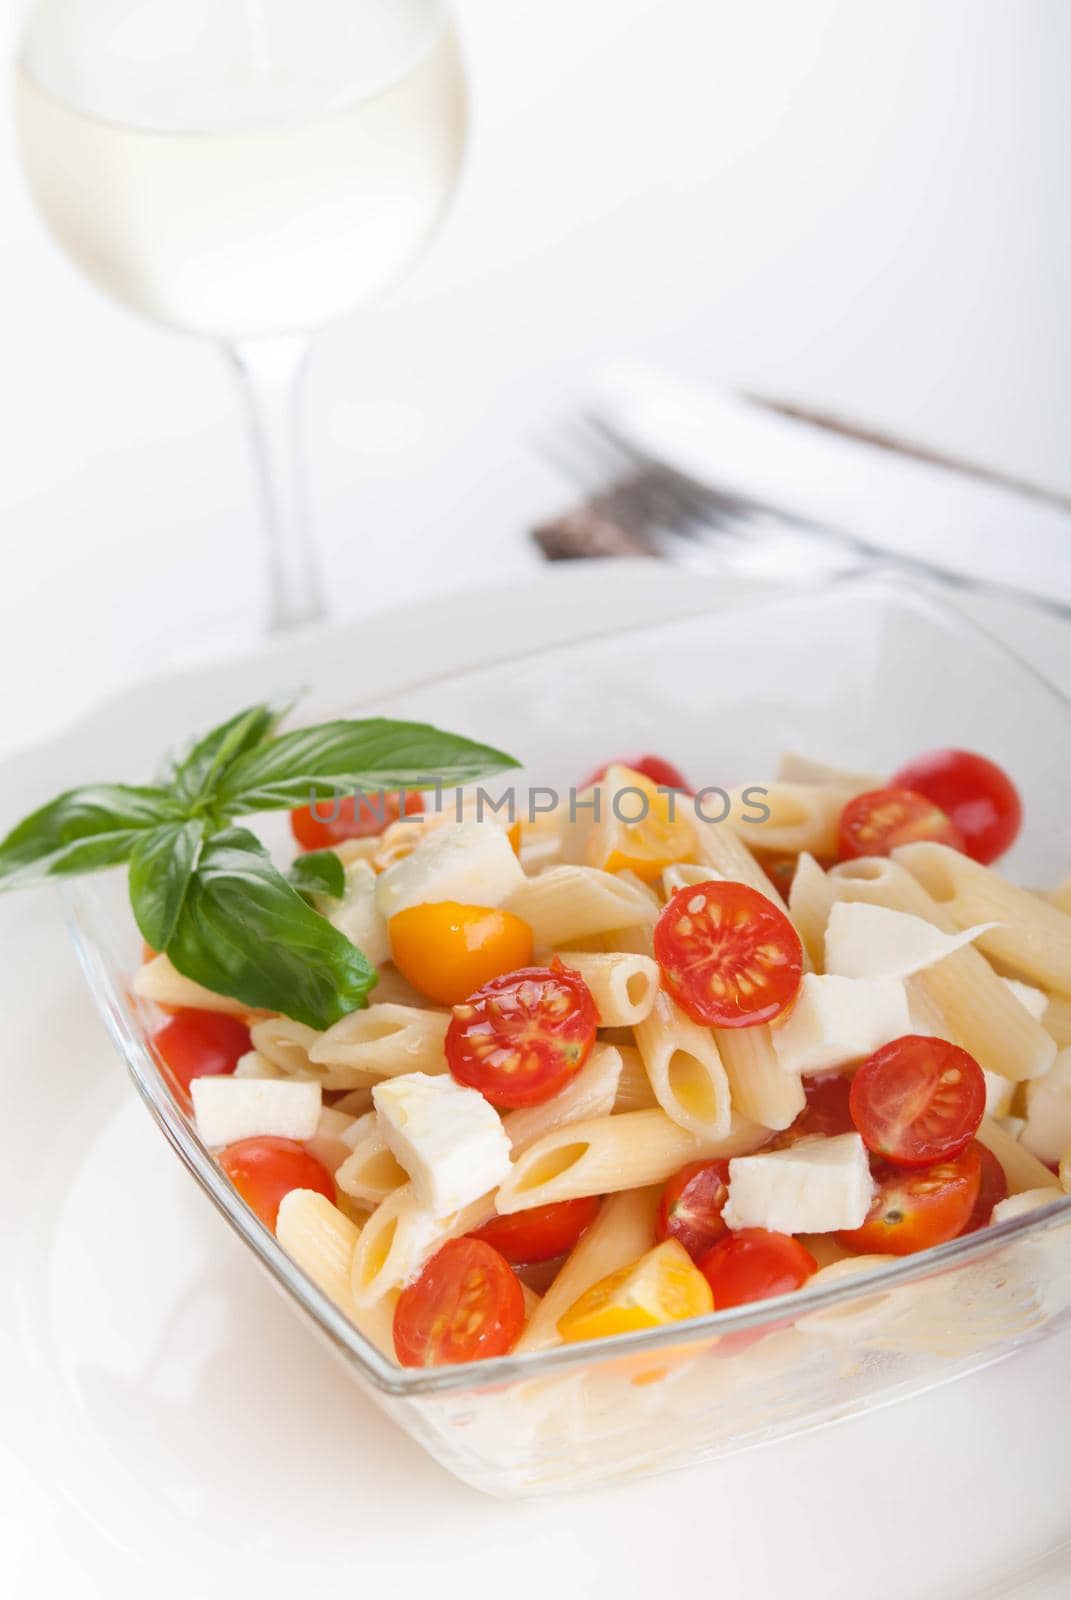 bright and tasty pasta salad with fresh mozarella and cherry tomatoes, basil